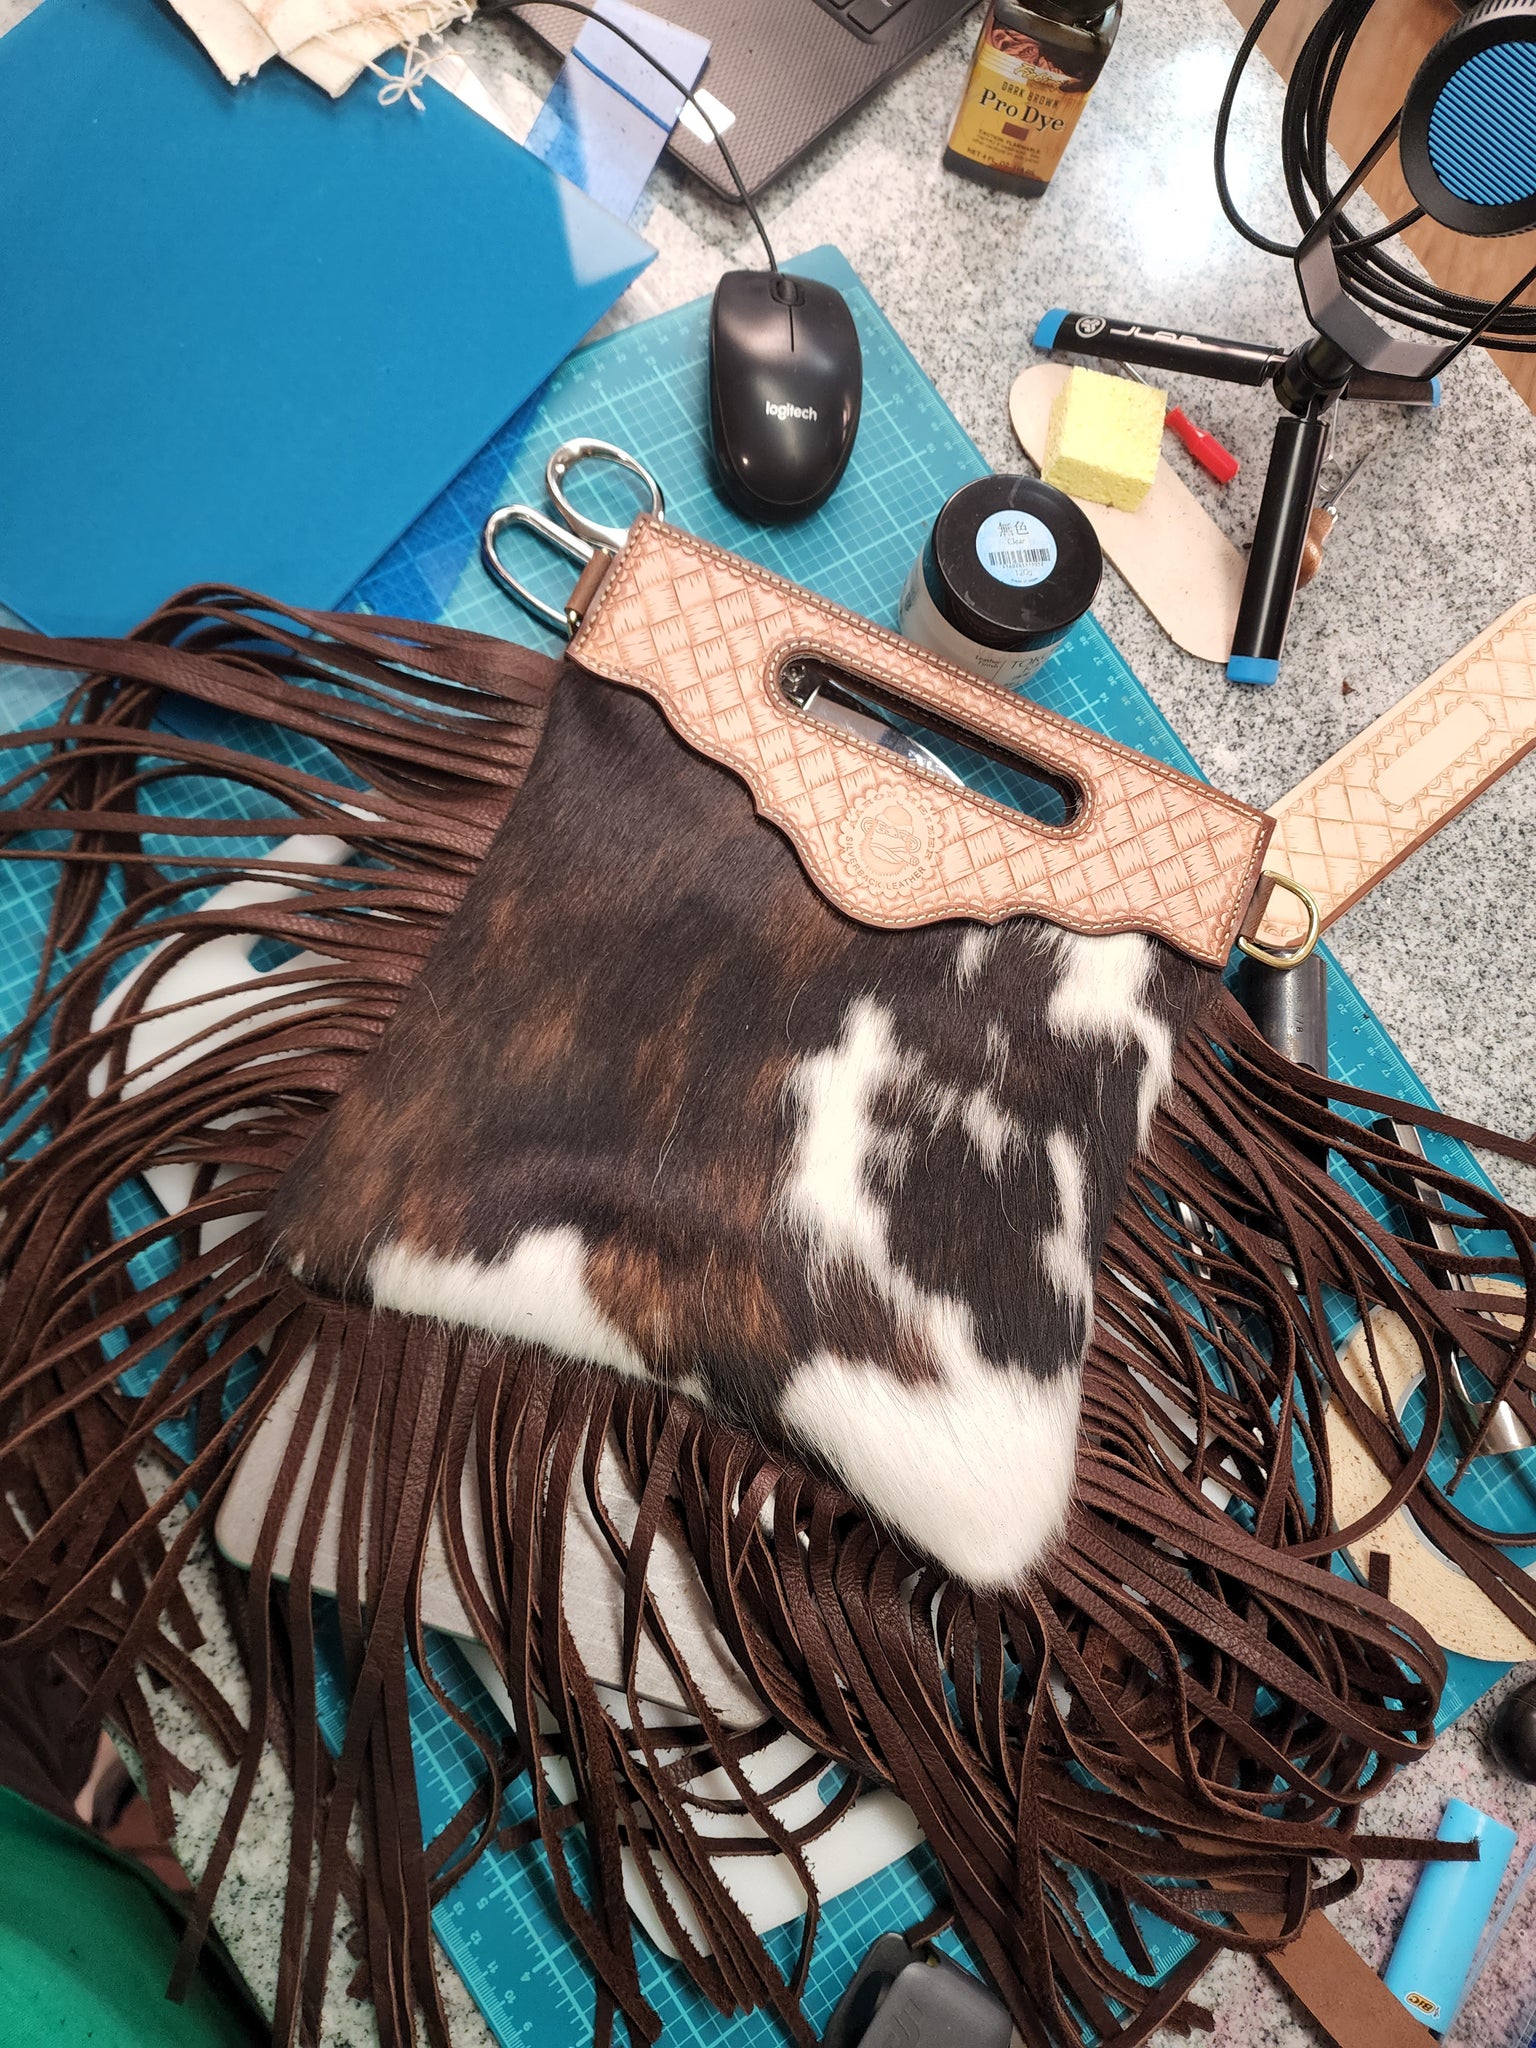 Round About Tooled Leather Hair on Hide Fringe Purse #4